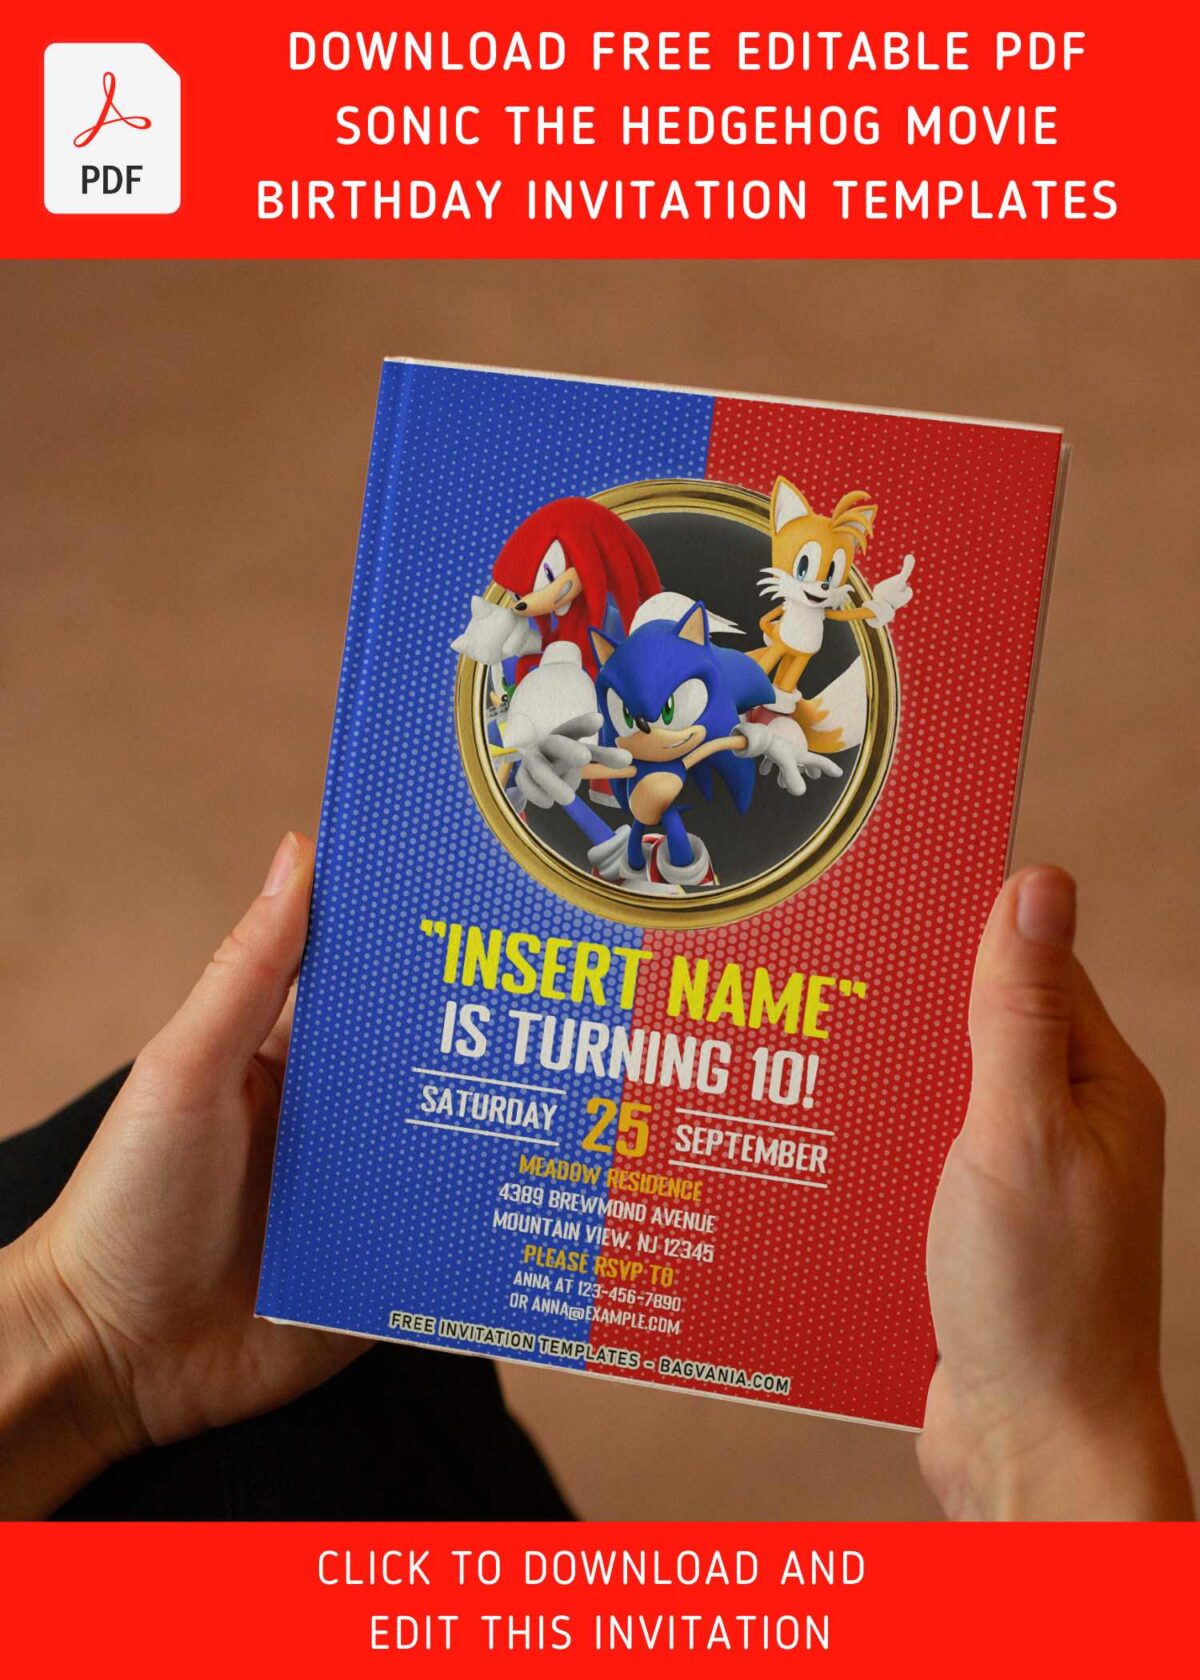 (Free Editable PDF) Sonic The Hedgehog Movie Themed Birthday Invitation Templates with the Tails fox